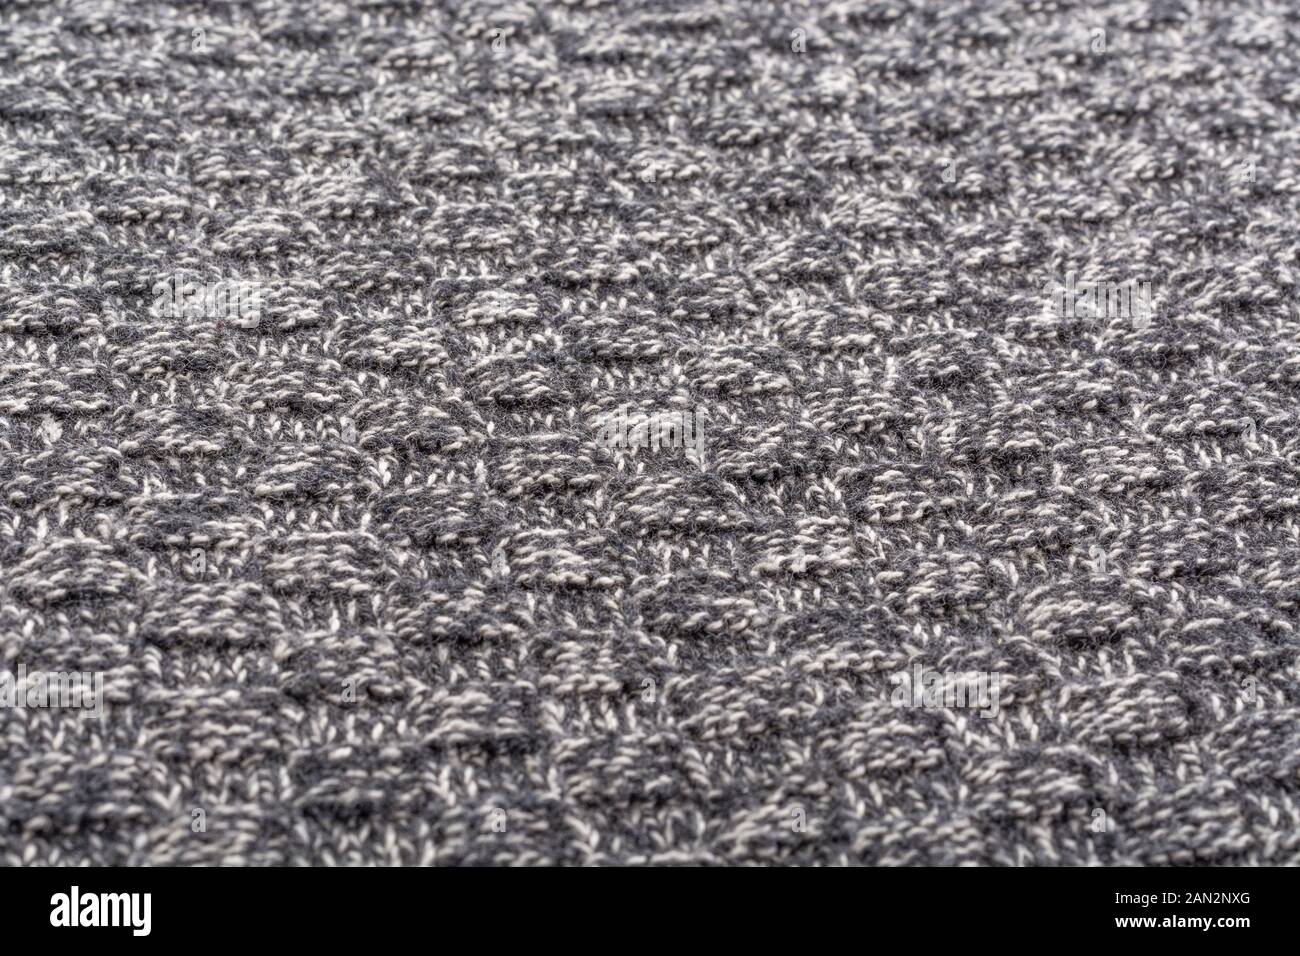 Close-up macro shot of knitted polyester fabric. Metaphor stitched in time, stitched up, warp and weft, UK textile industry. Stock Photo